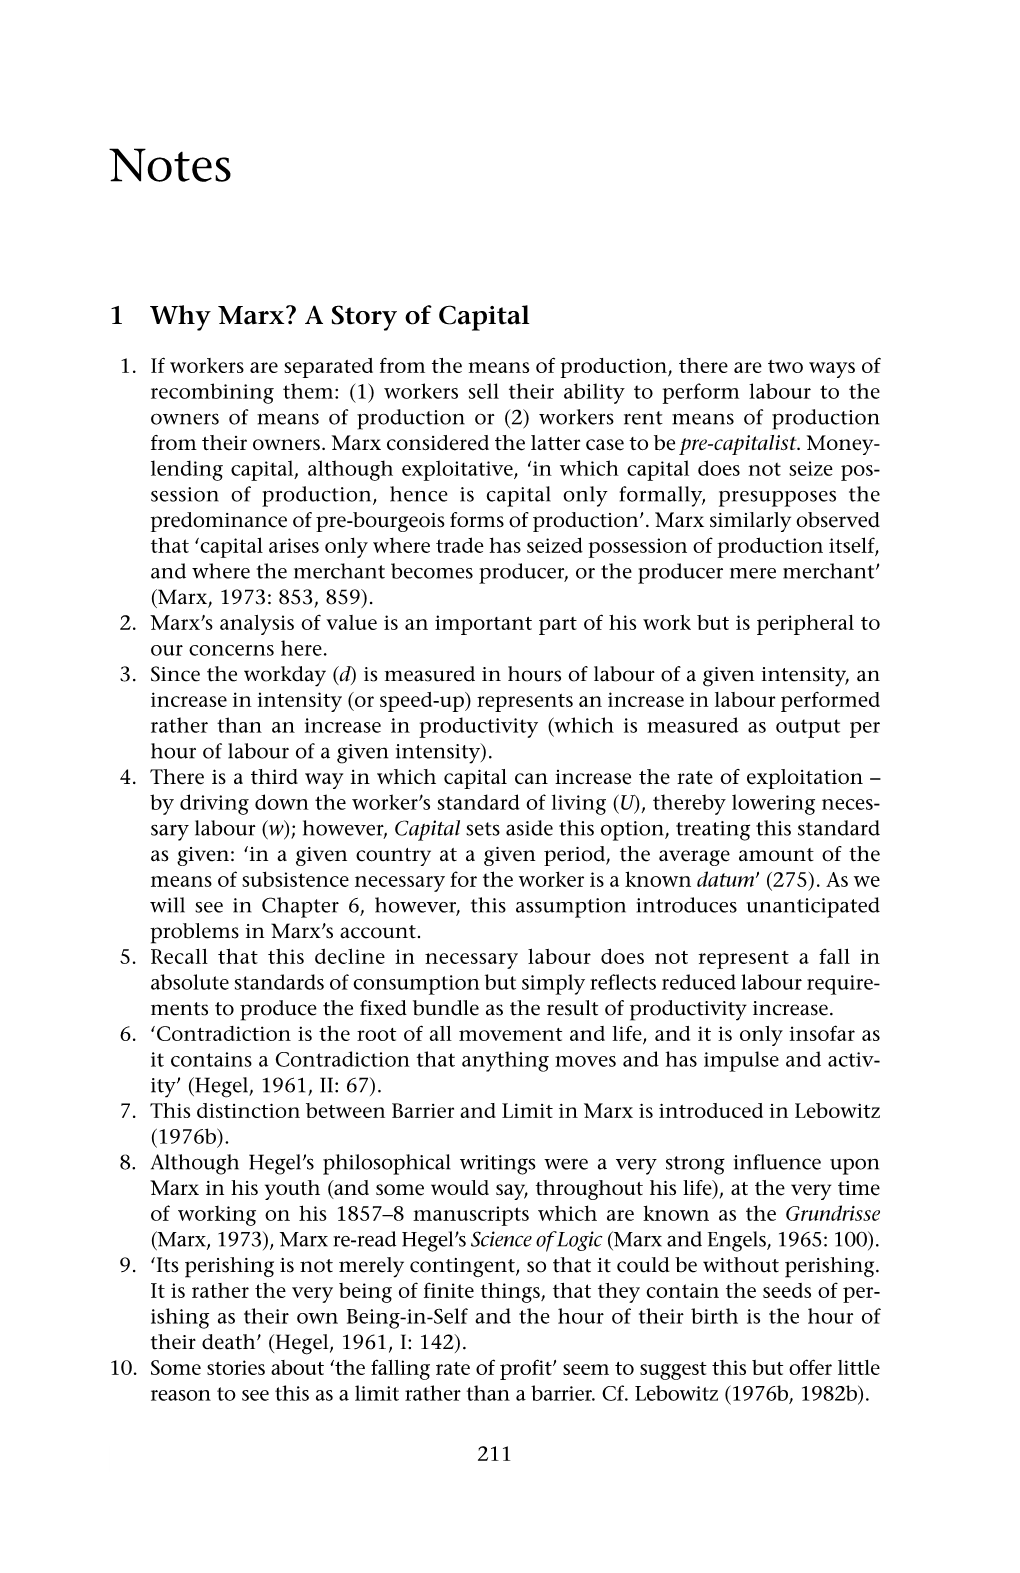 1 Why Marx? a Story of Capital